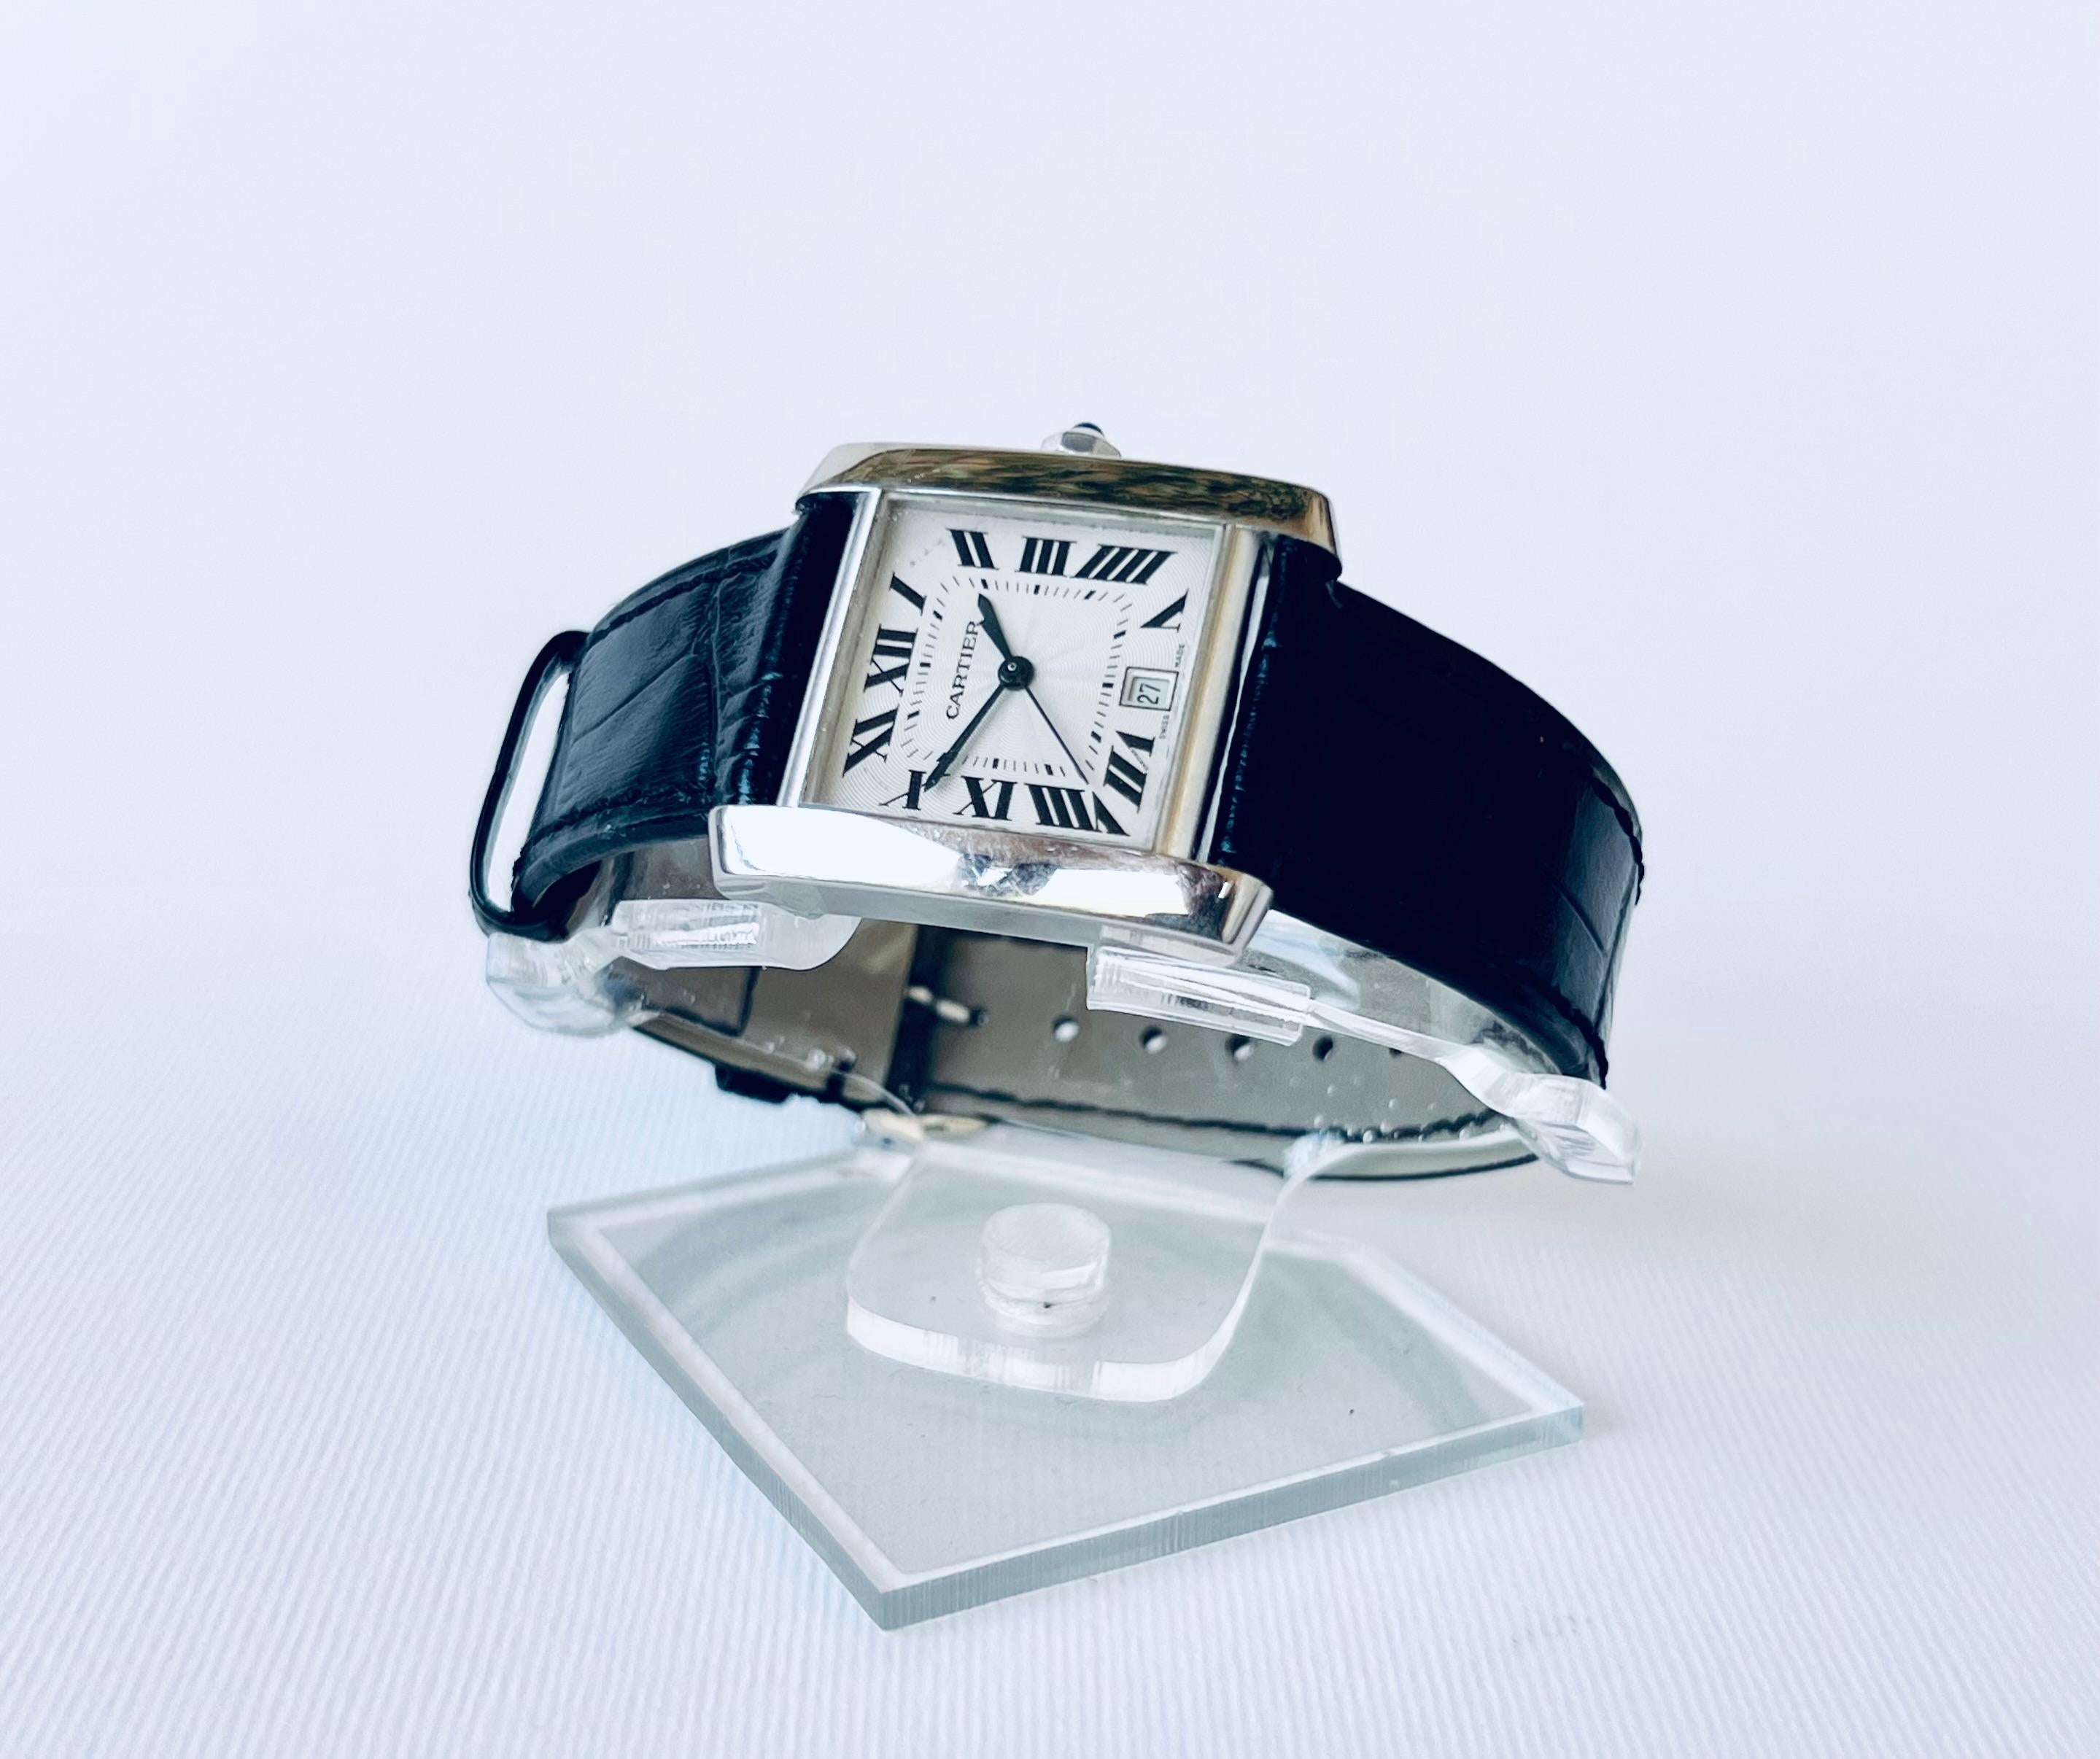  Cartier Tank Française 18K White Gold 2366 Automatic Date Watch   For Sale 10